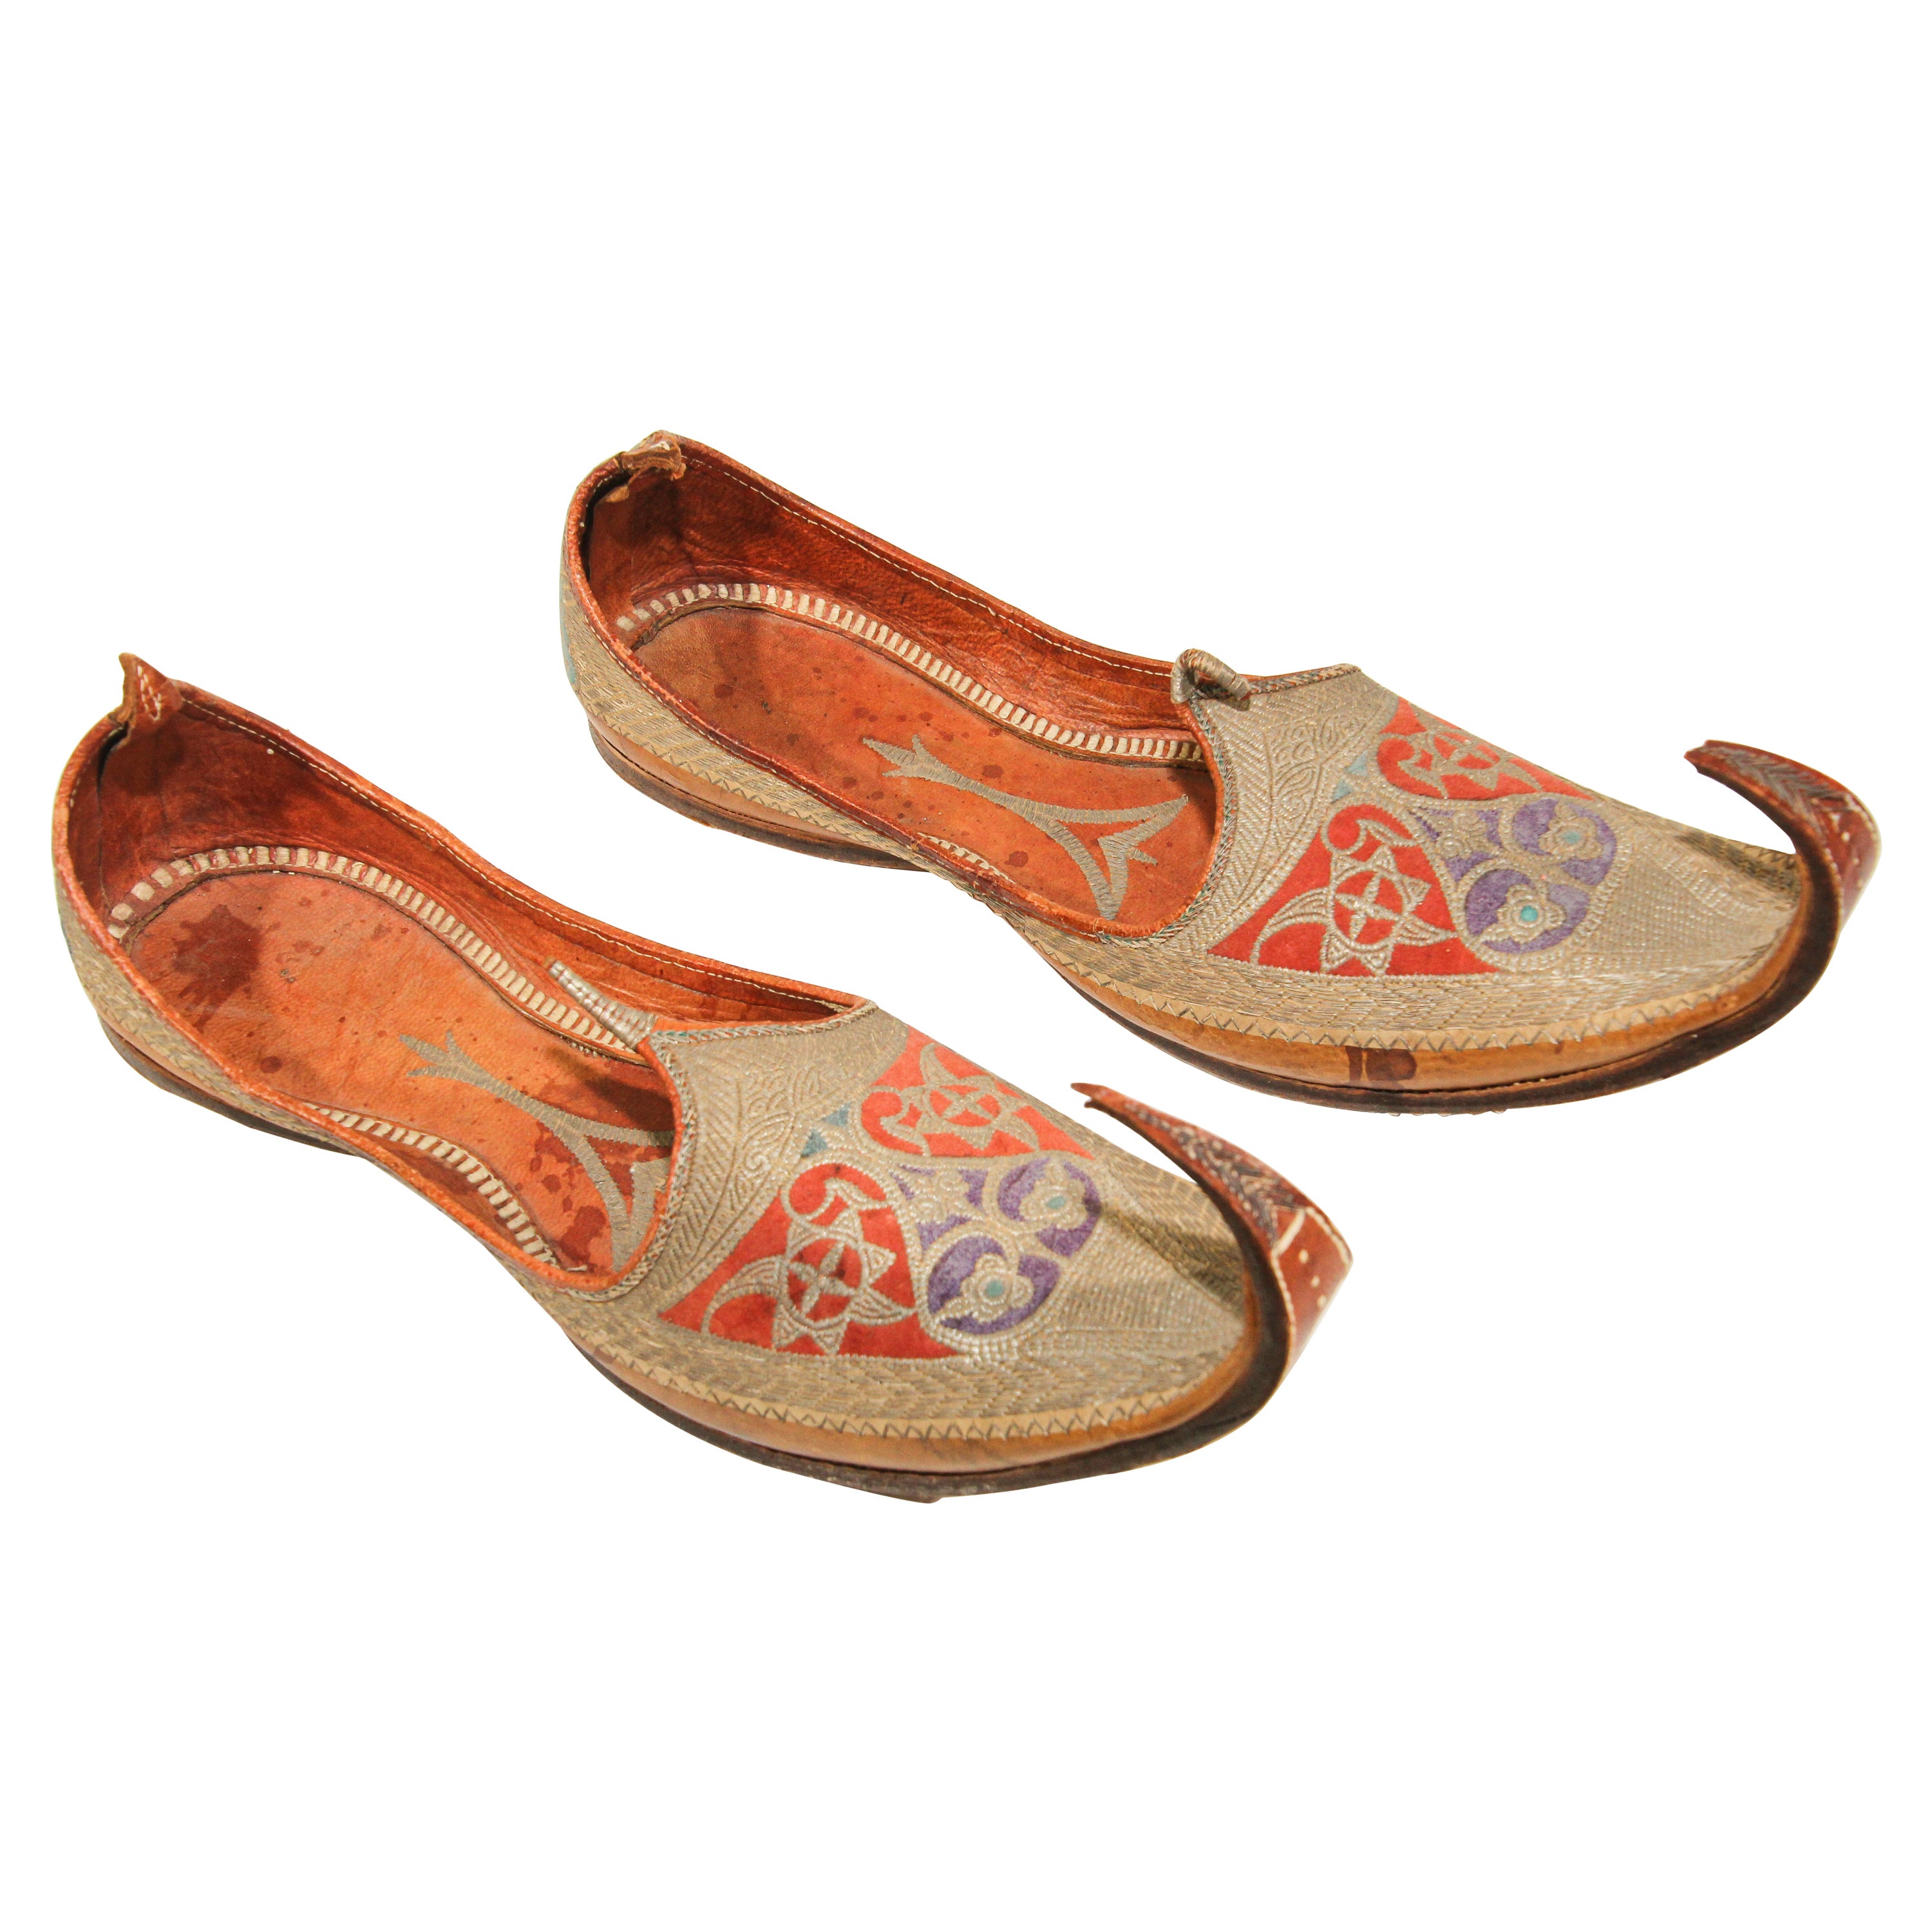 Antique Leather Mughal Shoes with Gold Embroidered For Sale